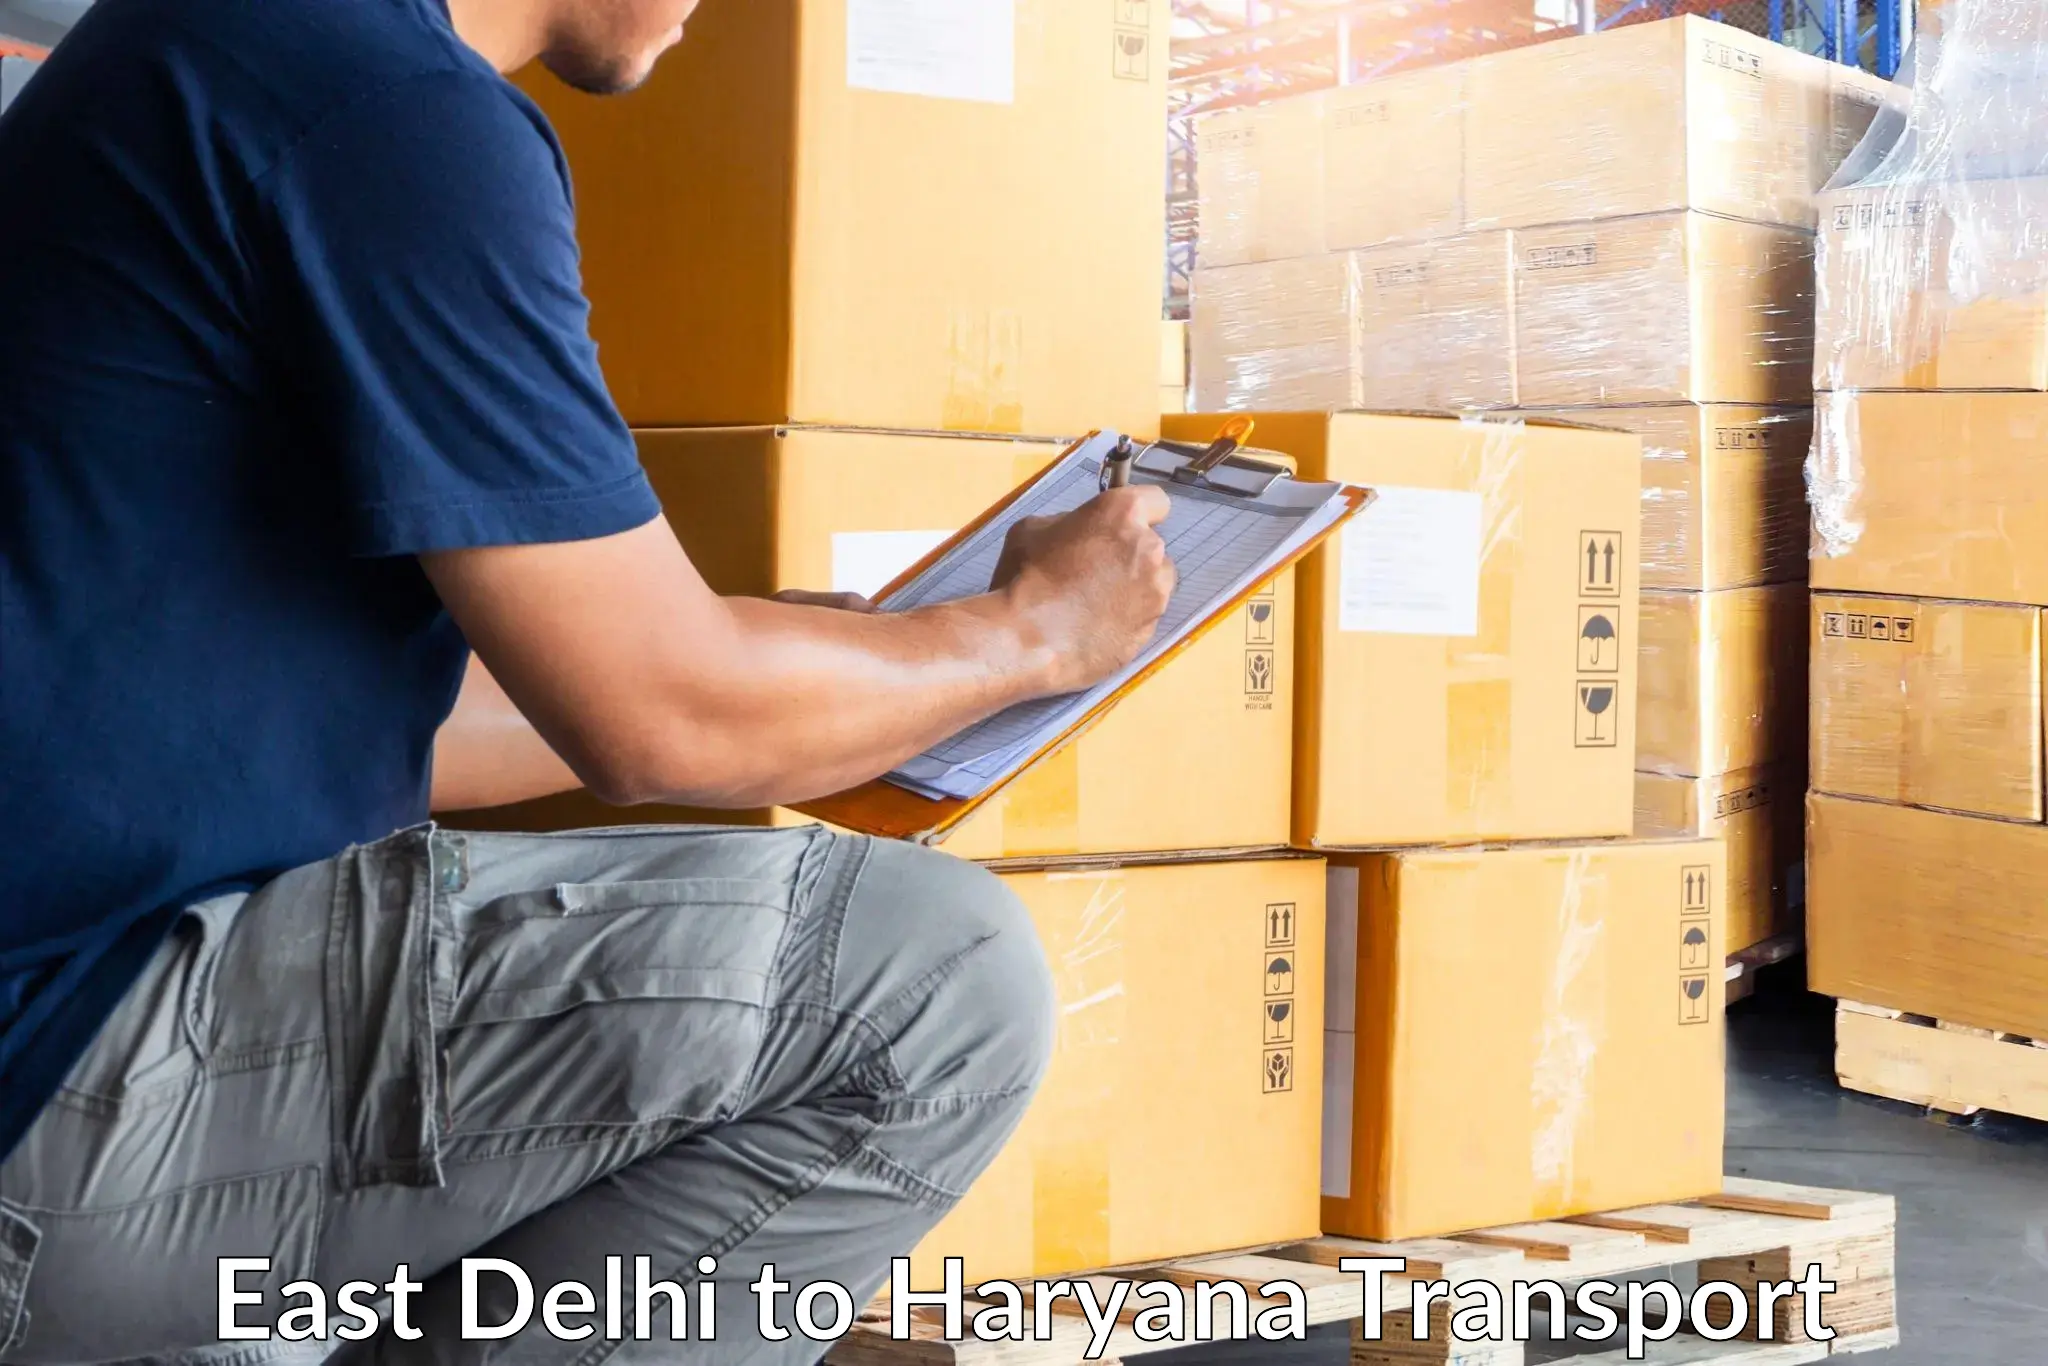 Two wheeler parcel service in East Delhi to Odhan